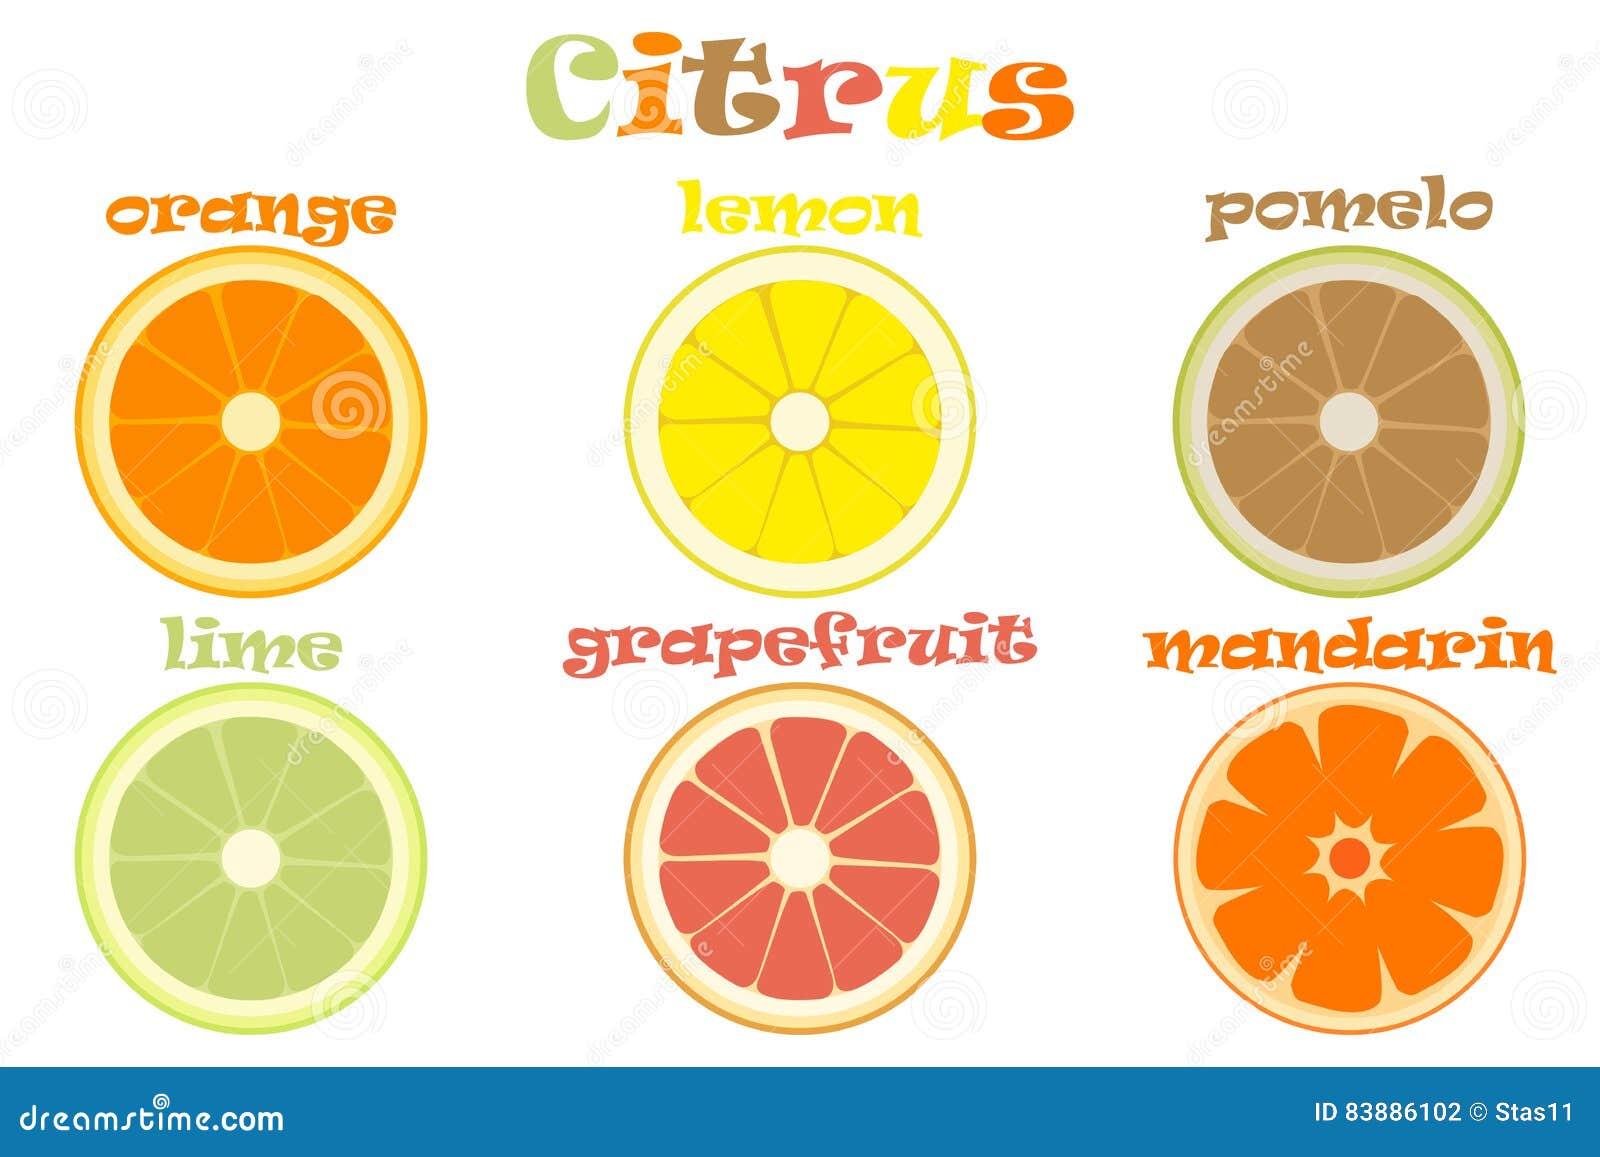 Set Of Different Types Of Citrus Fruits With Names Stock ...